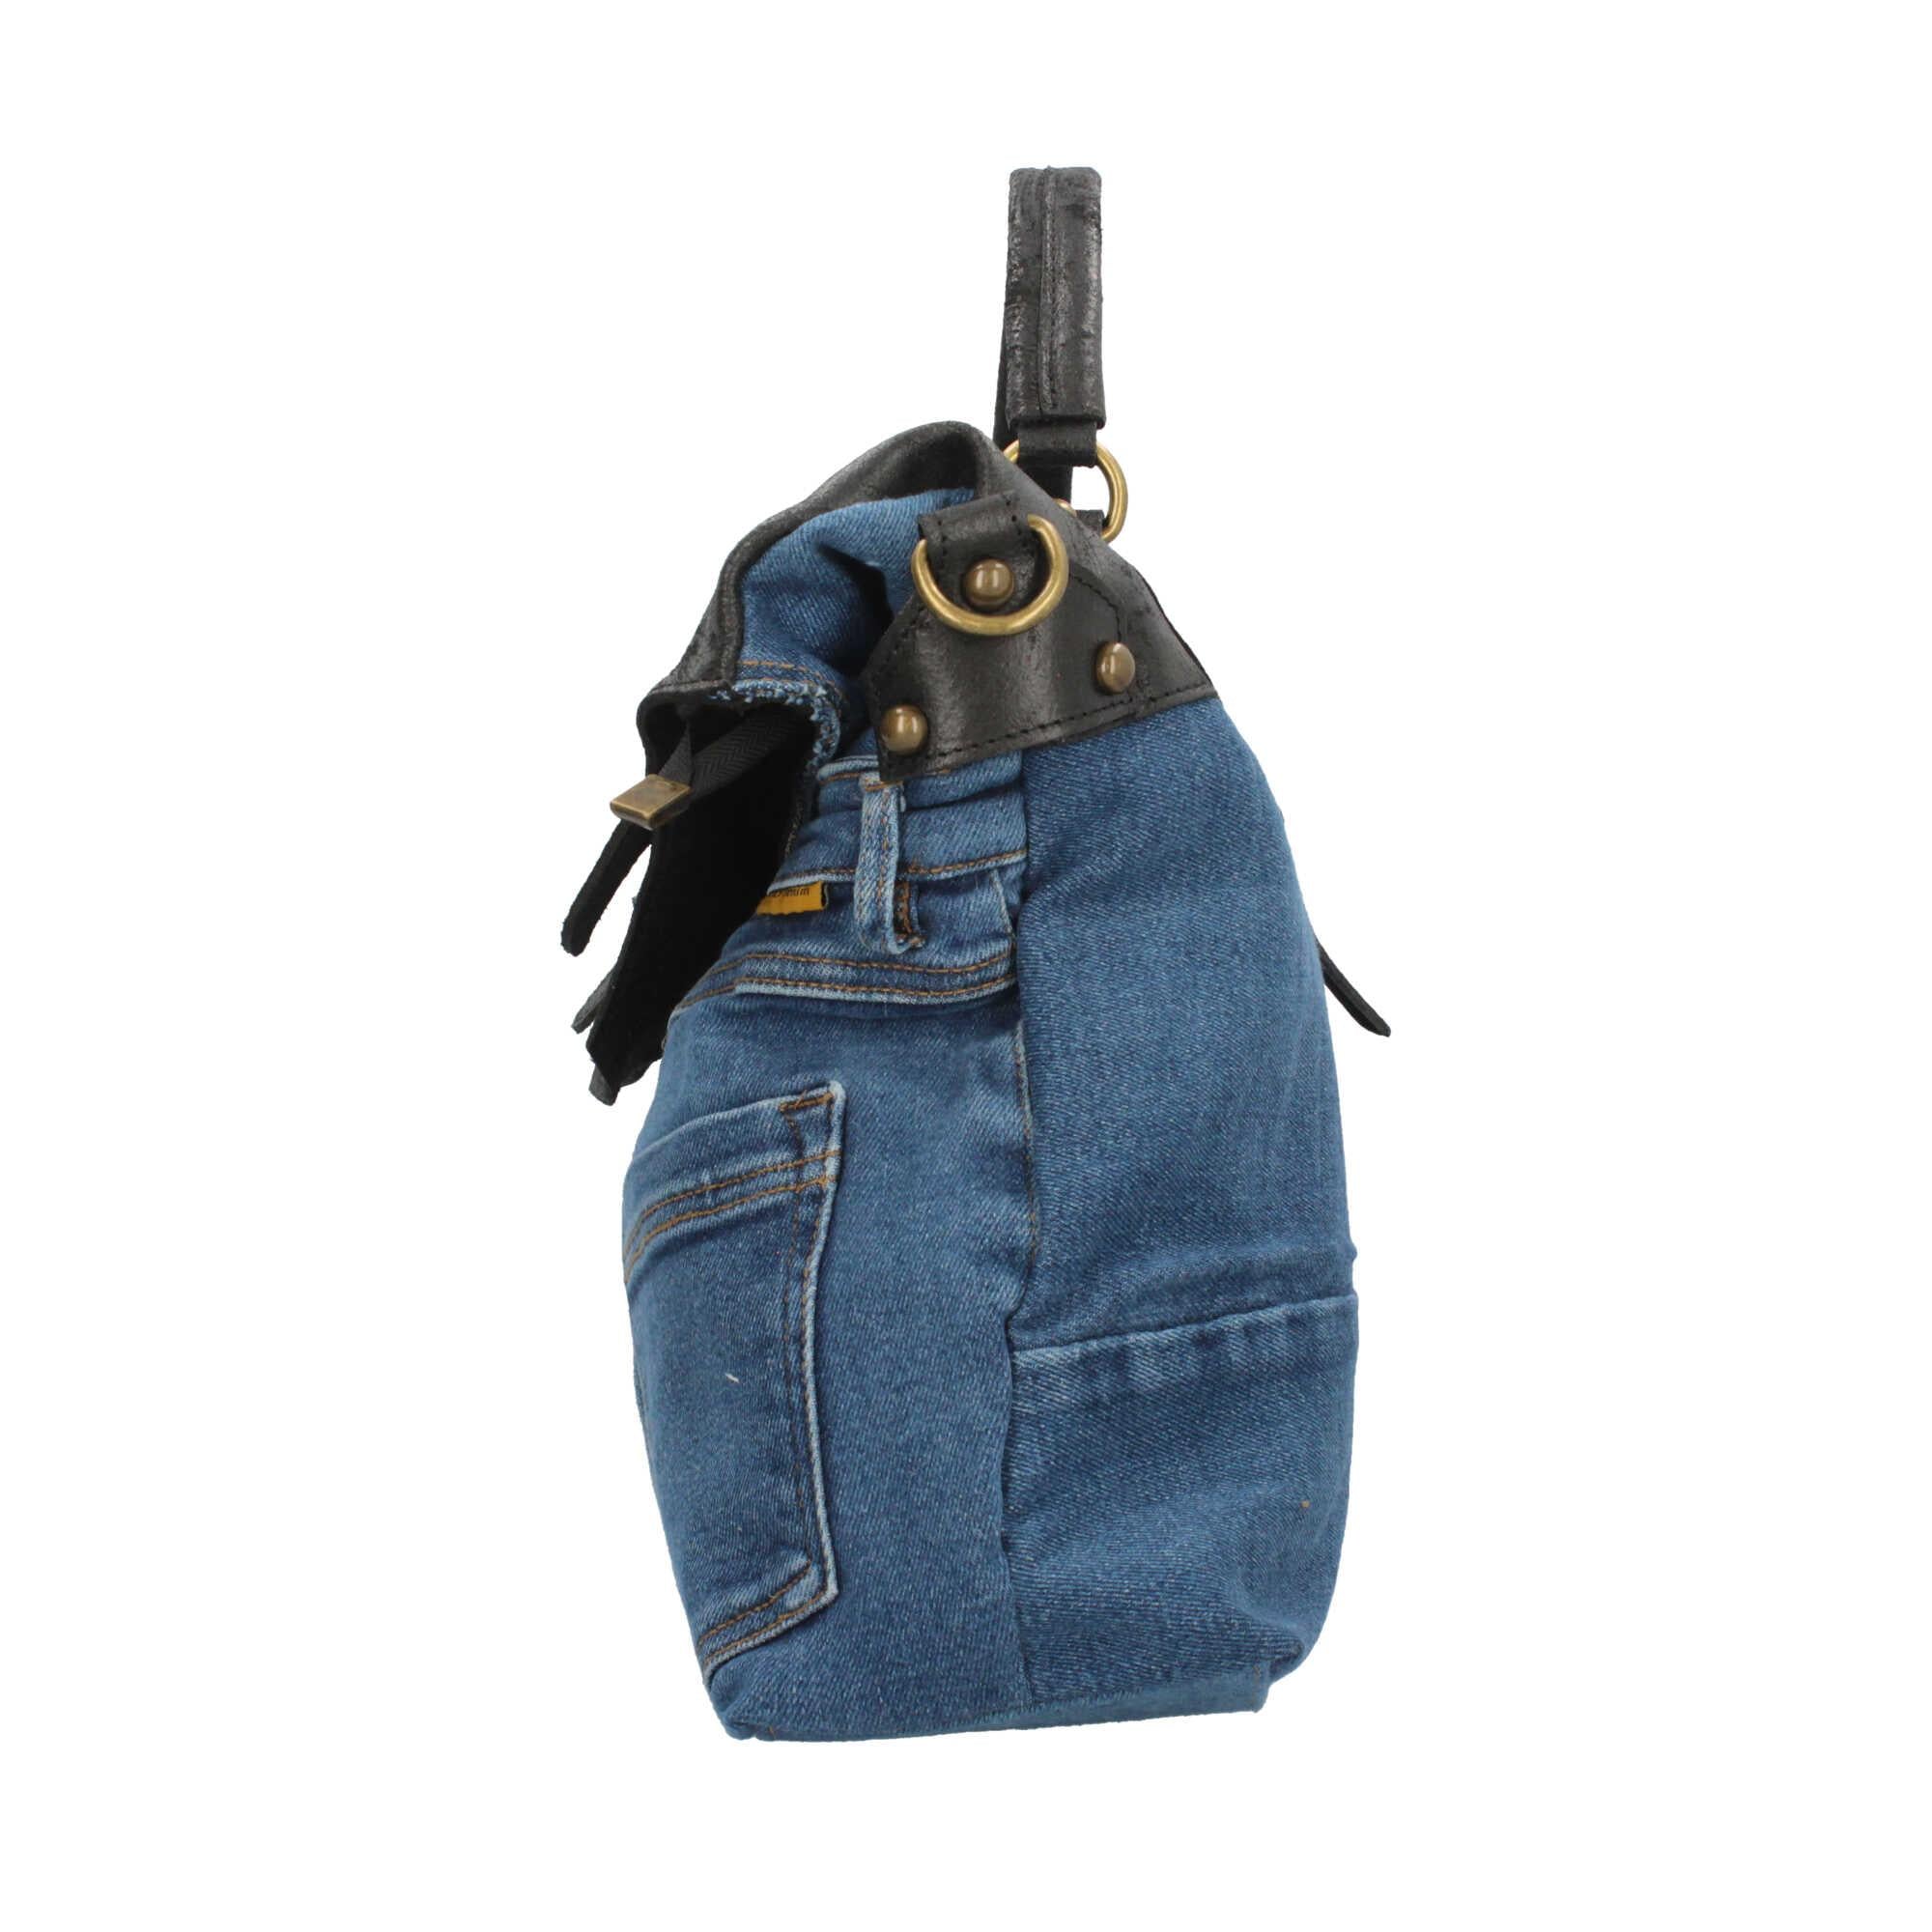 Borsa a mano in jeans Made in italy